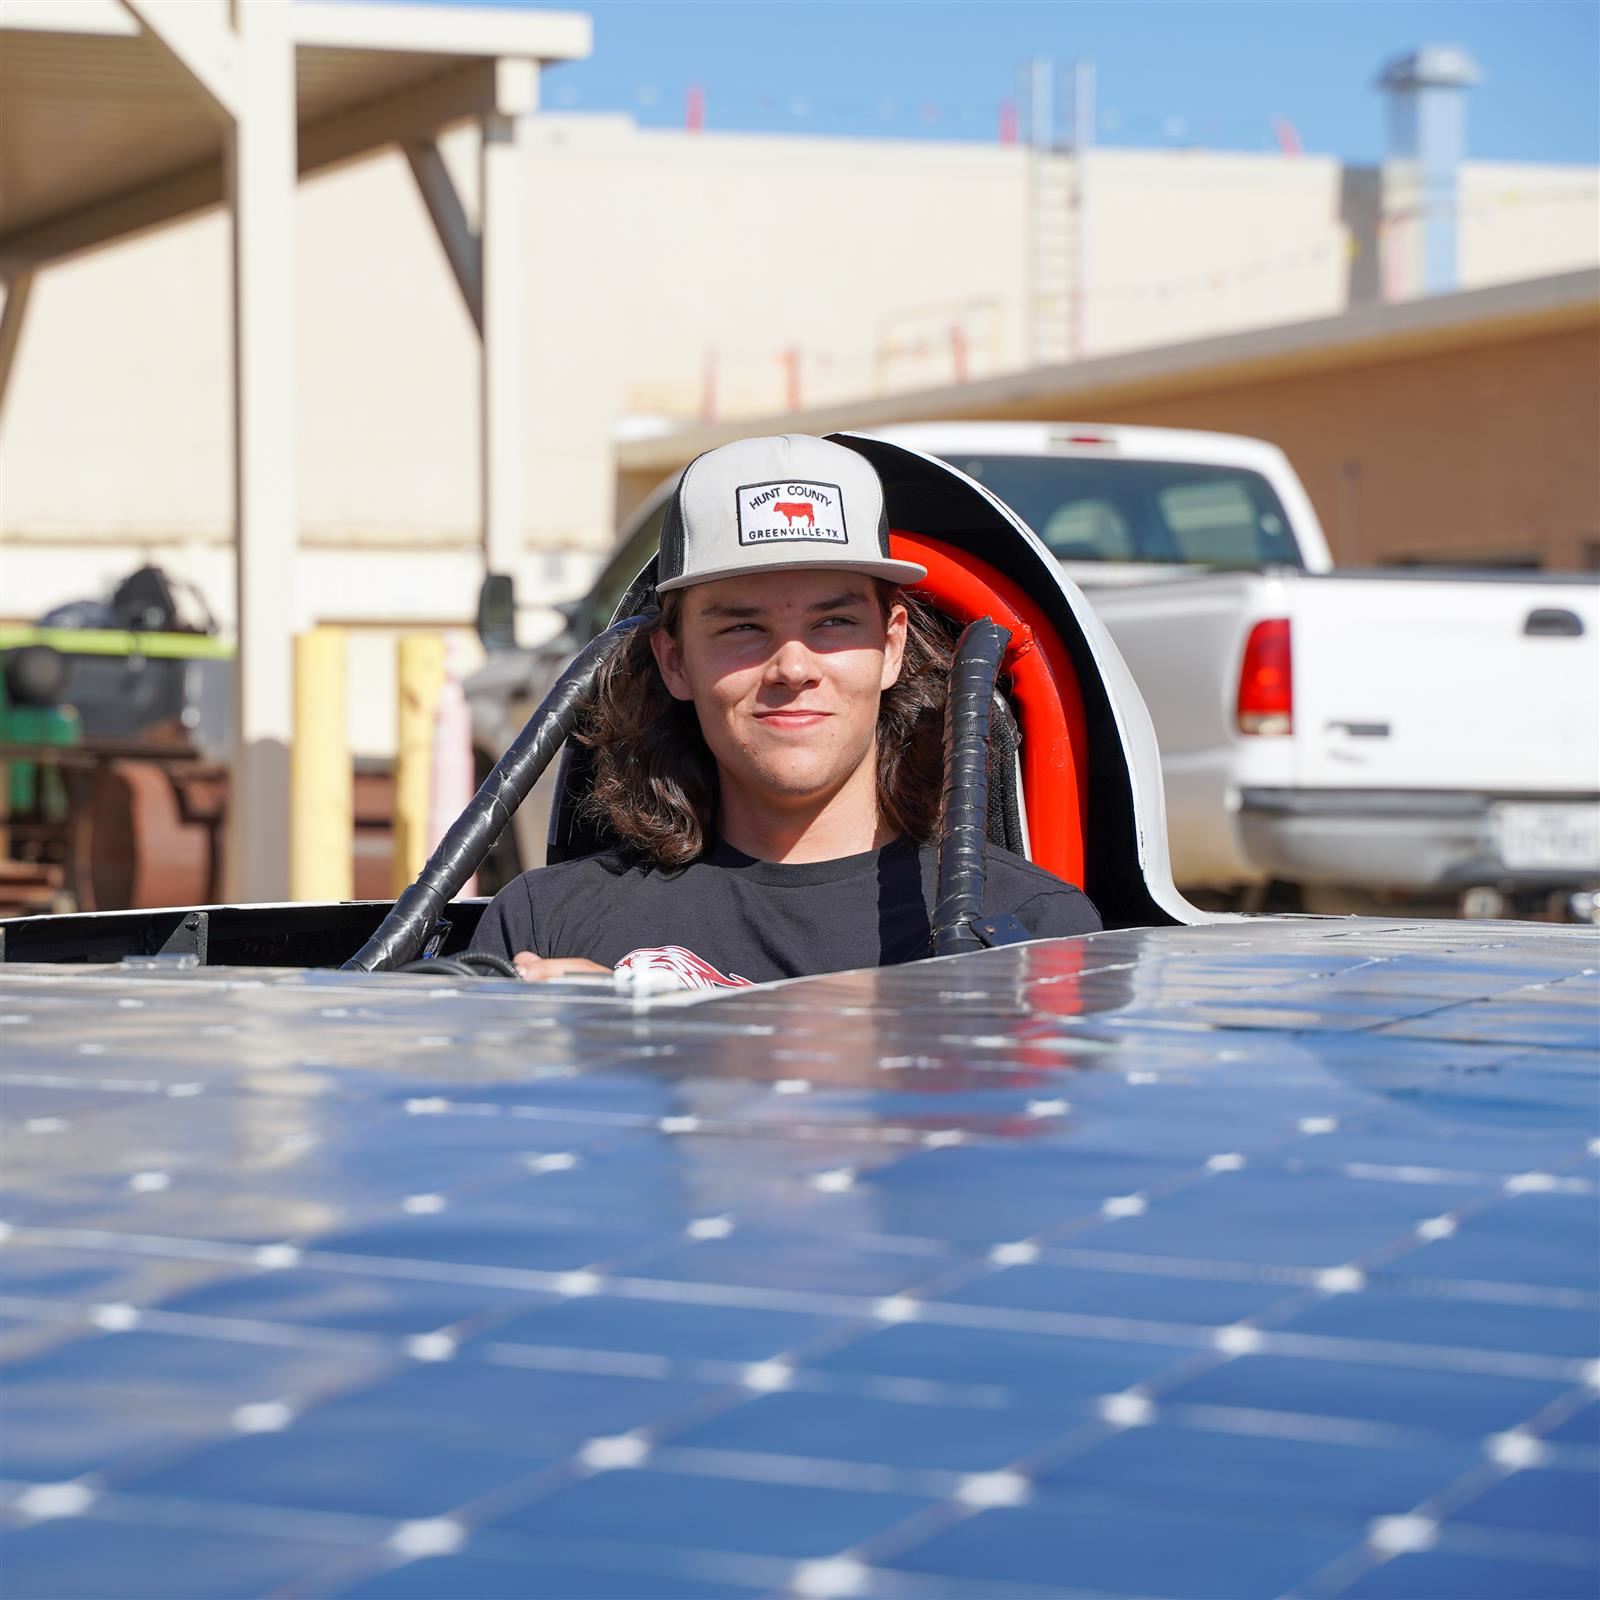 Iron Lions solar car team looking forward to competition